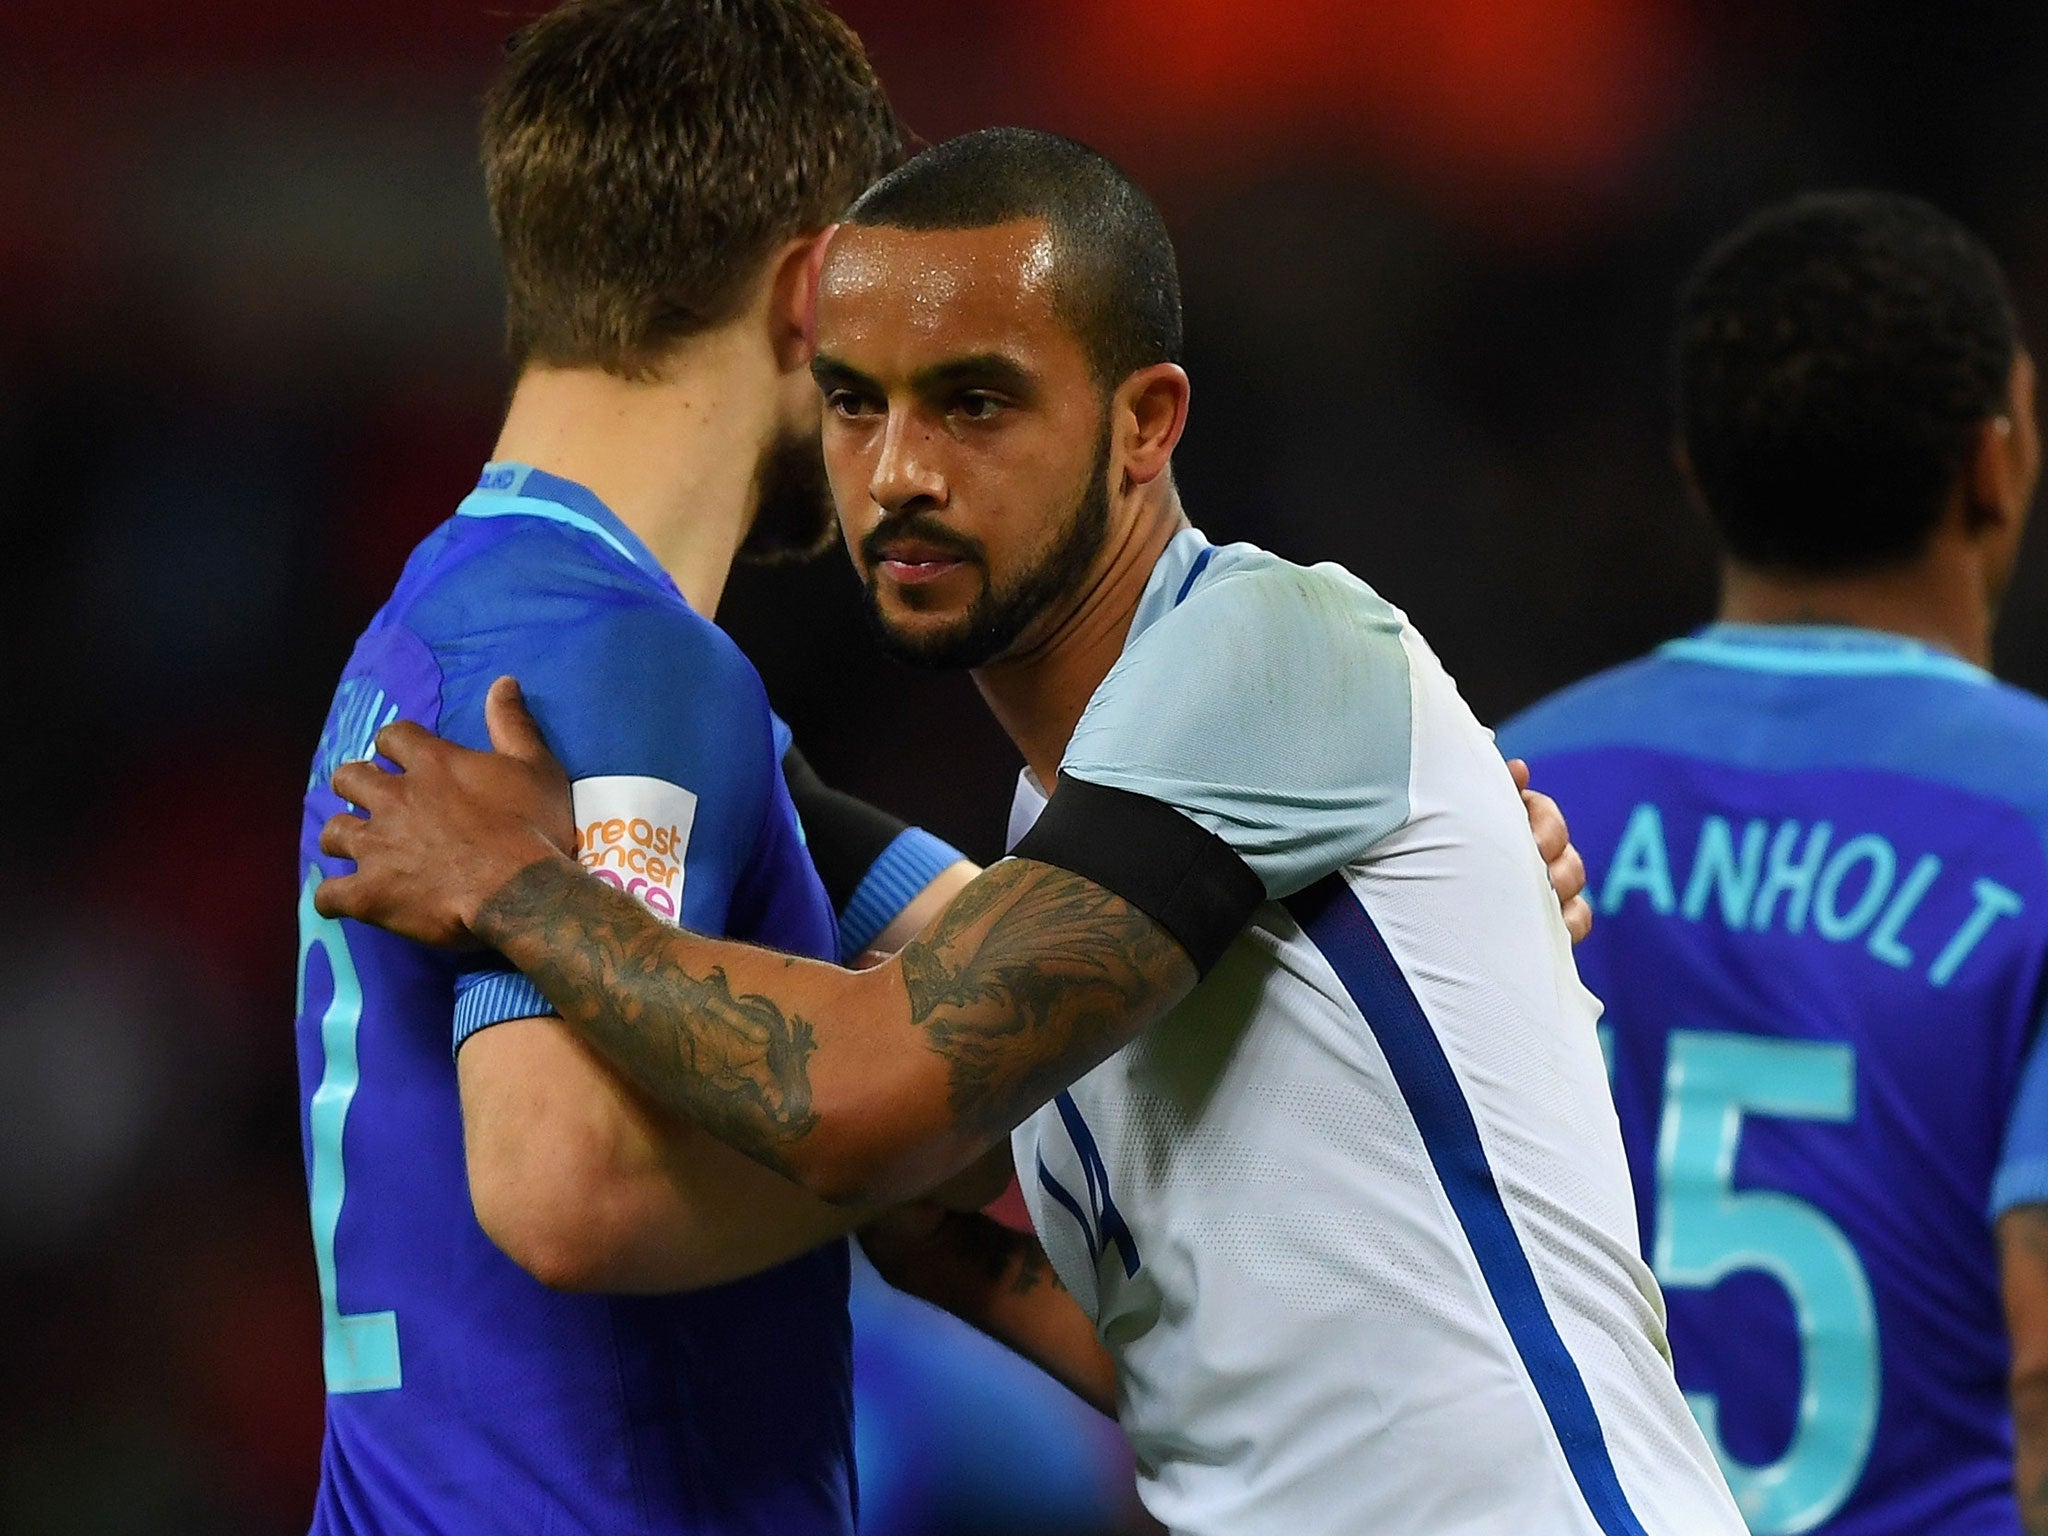 Theo Walcott pictured at the final whistle after the Netherlands defeat